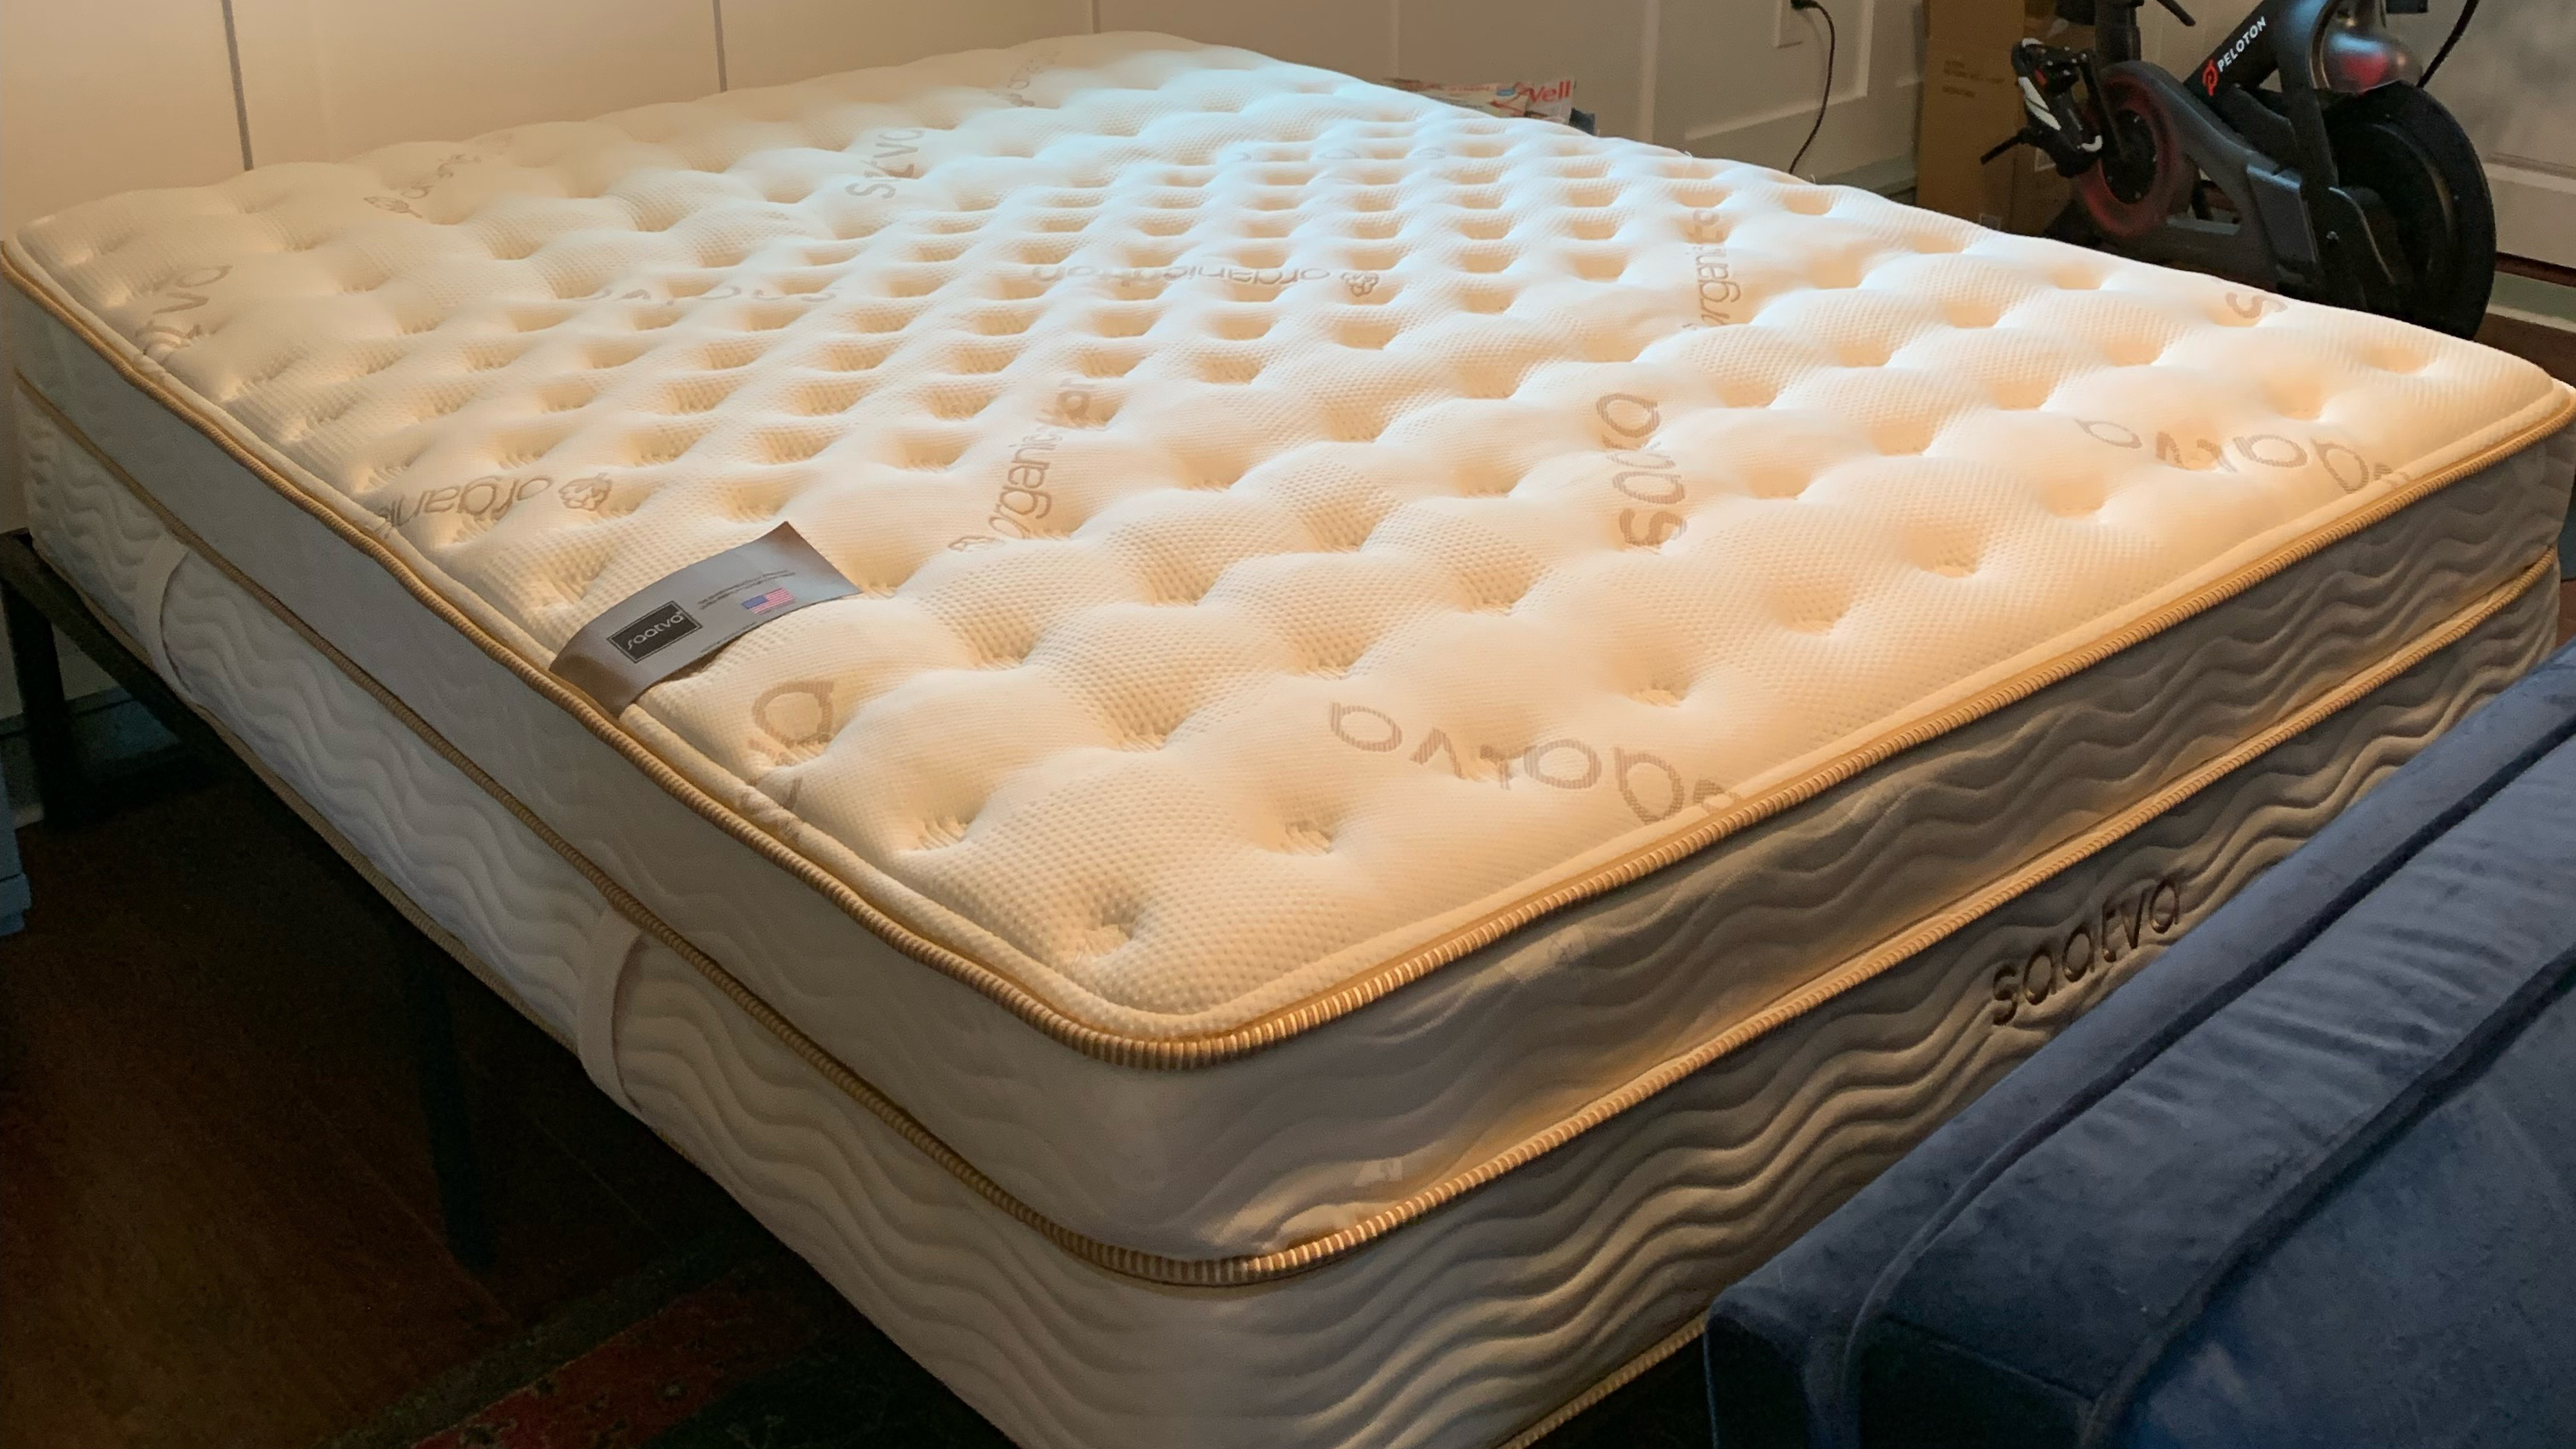 The picture shows the Saatva Classic mattress placed on the main bed frame